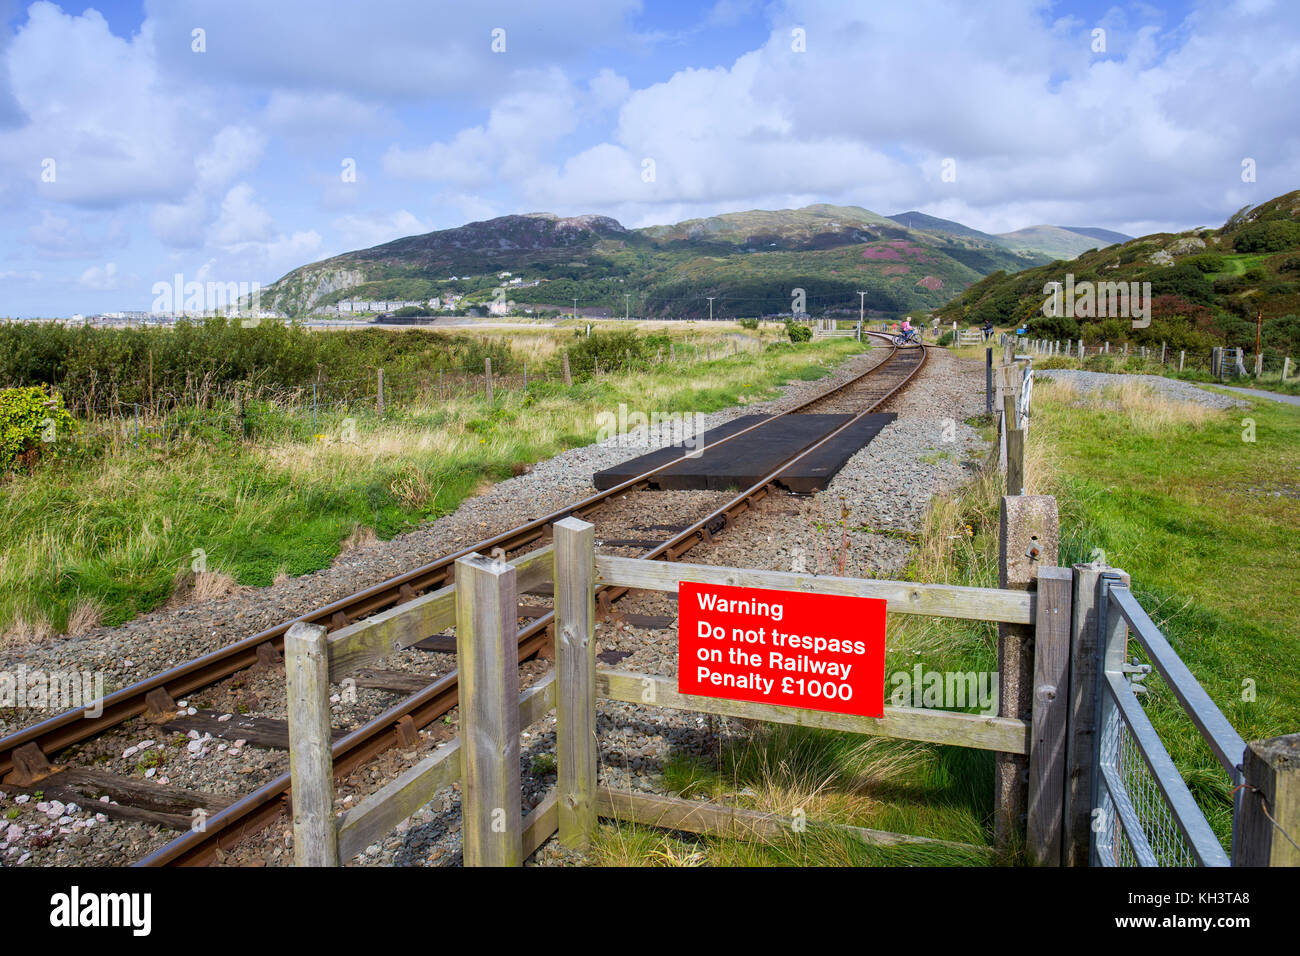 Do not trespass on the Railway warning sign in Barmouth Gwynedd Wales UK Stock Photo